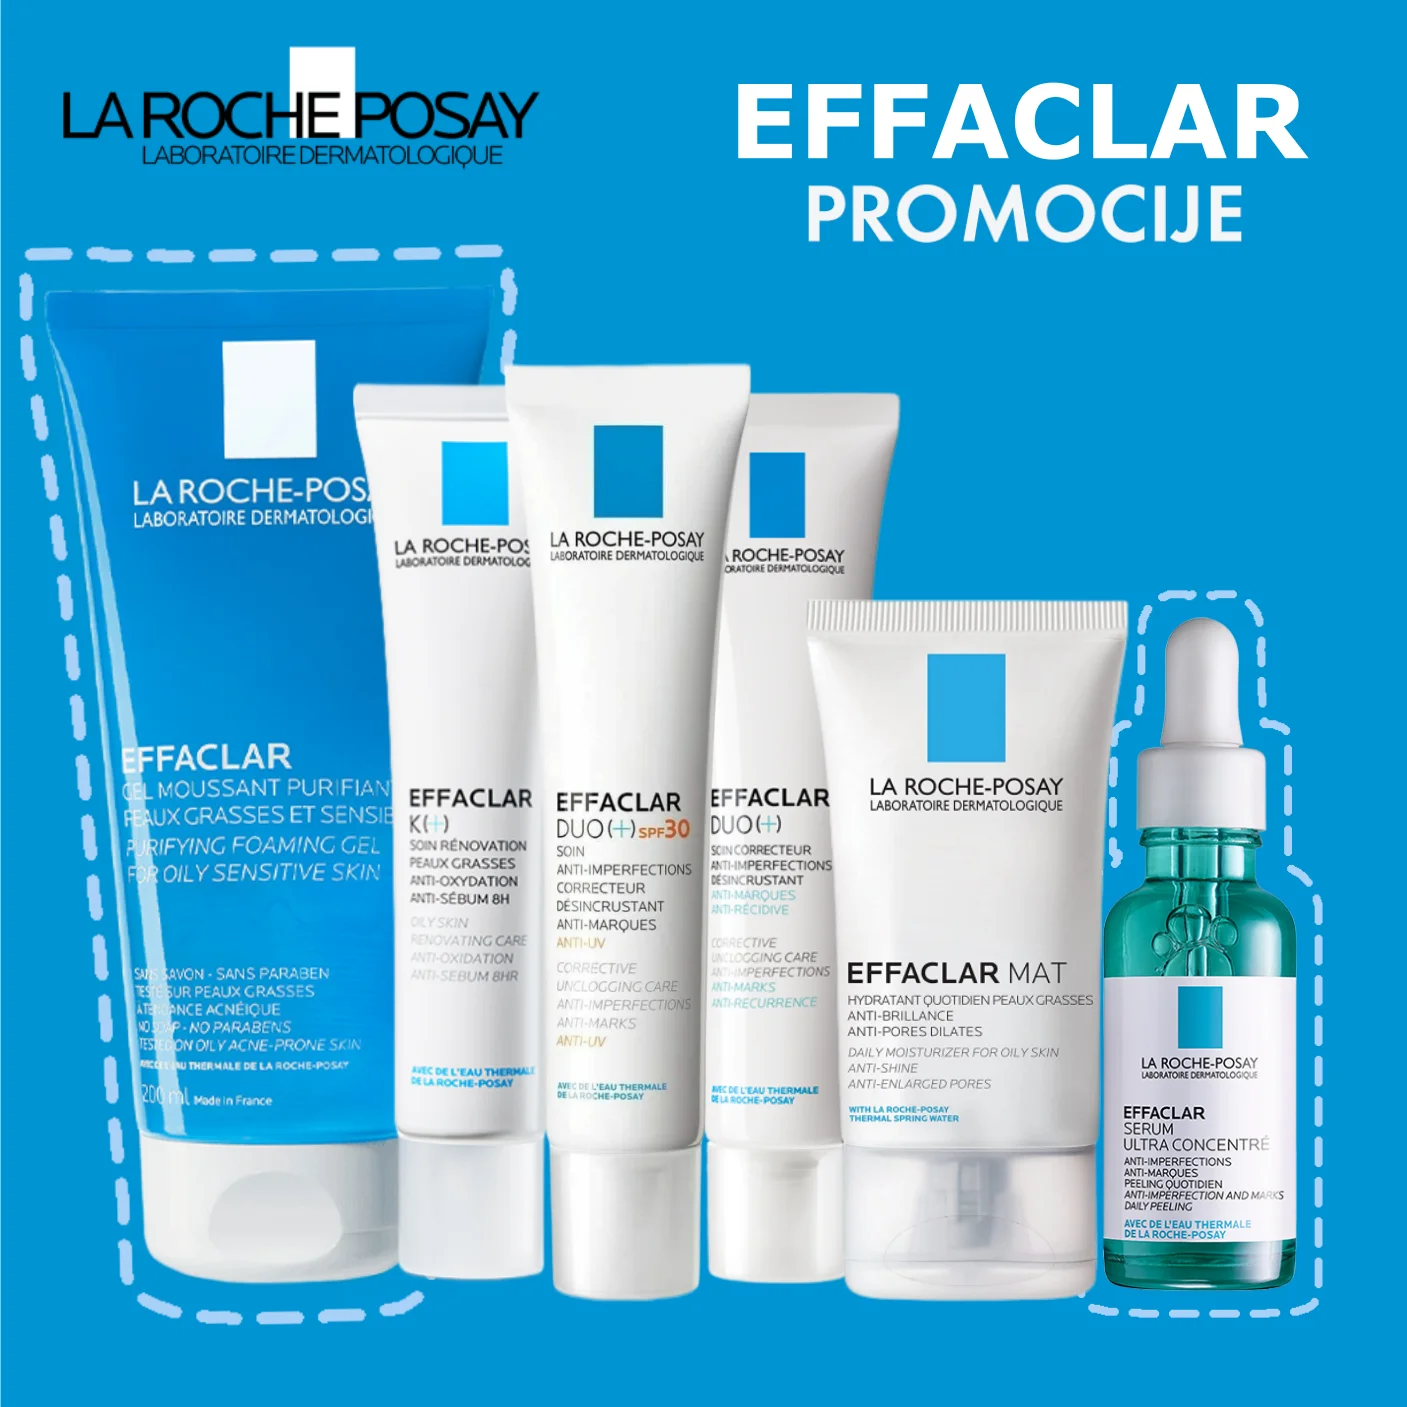 

La Roche Posay EFFACLAR Anti-imperfection Facial Care Cleaning Correct Acne Pimples Marks Skin Regenerating Treatment